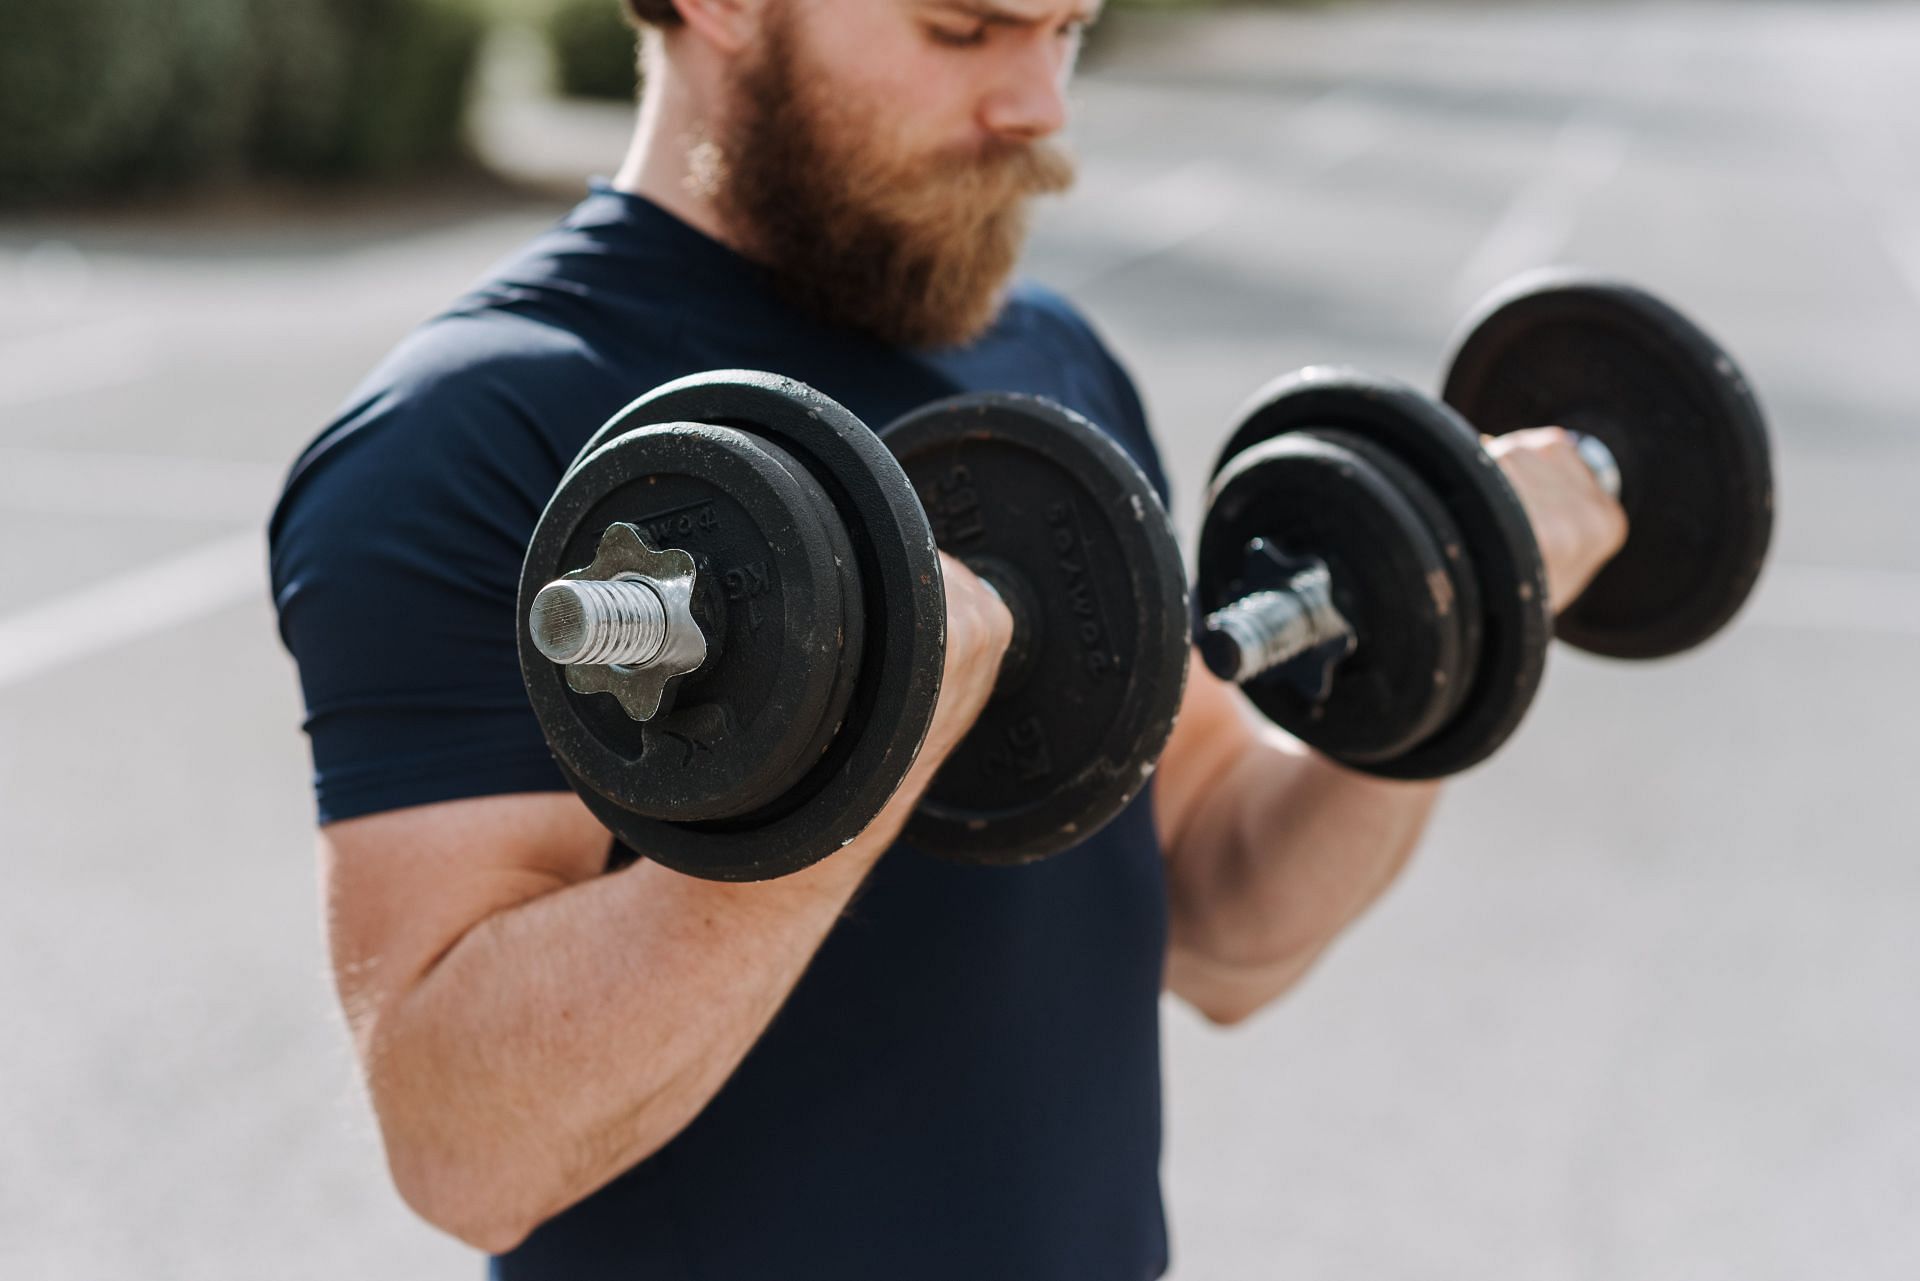 Zottman curls is a great workout for biceps and forearms. (Image via Pexels / Anete Lusina)